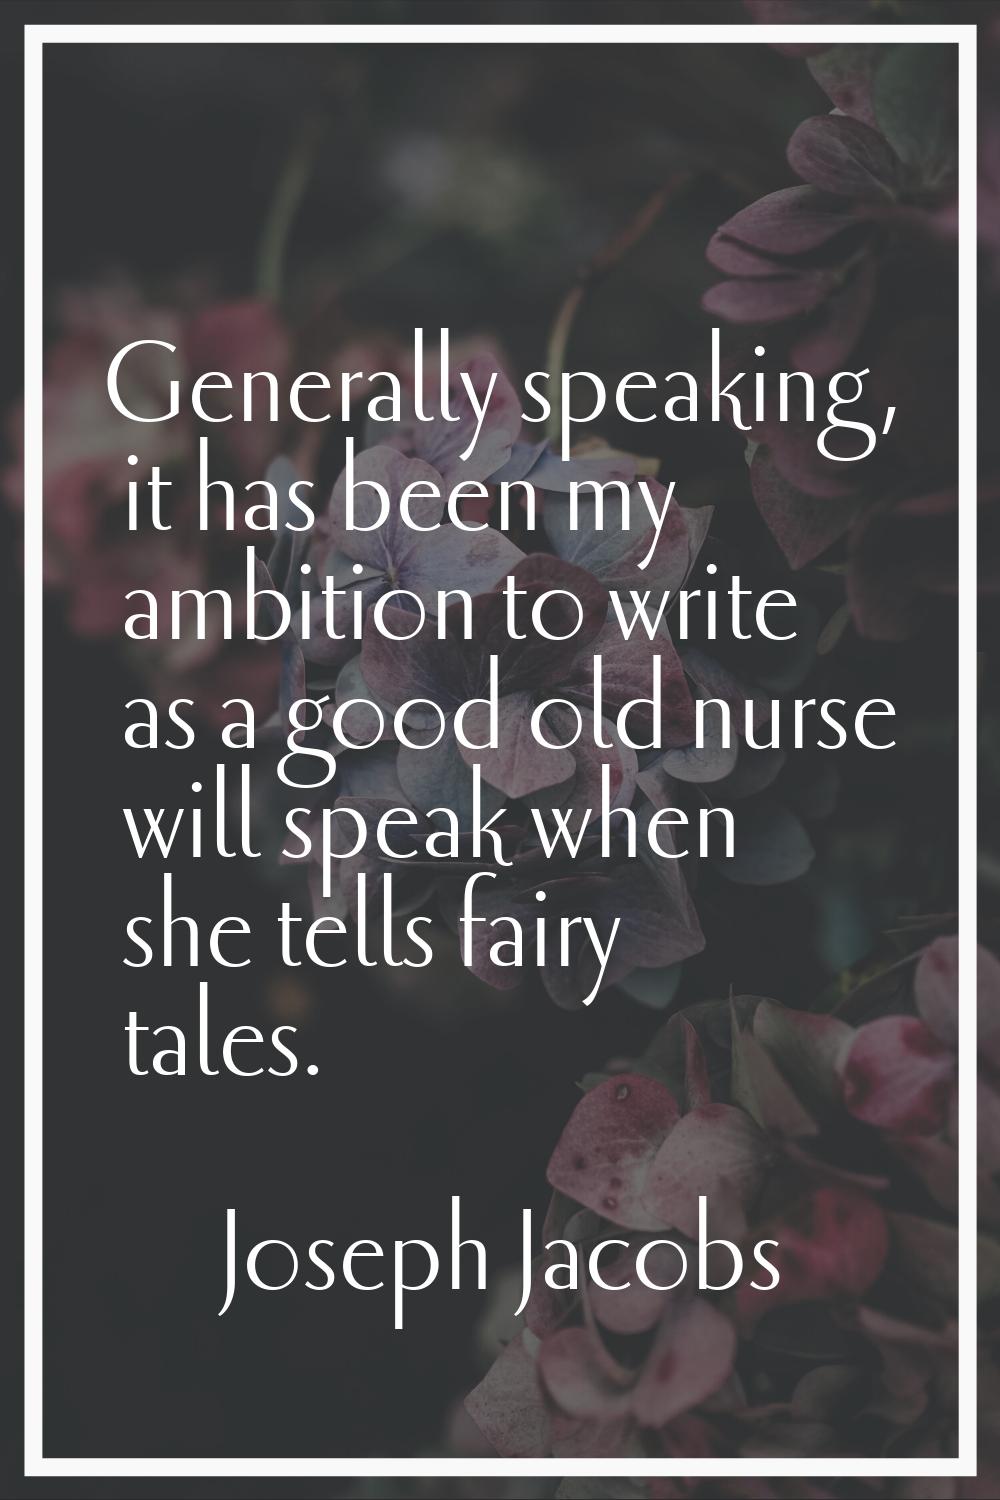 Generally speaking, it has been my ambition to write as a good old nurse will speak when she tells 